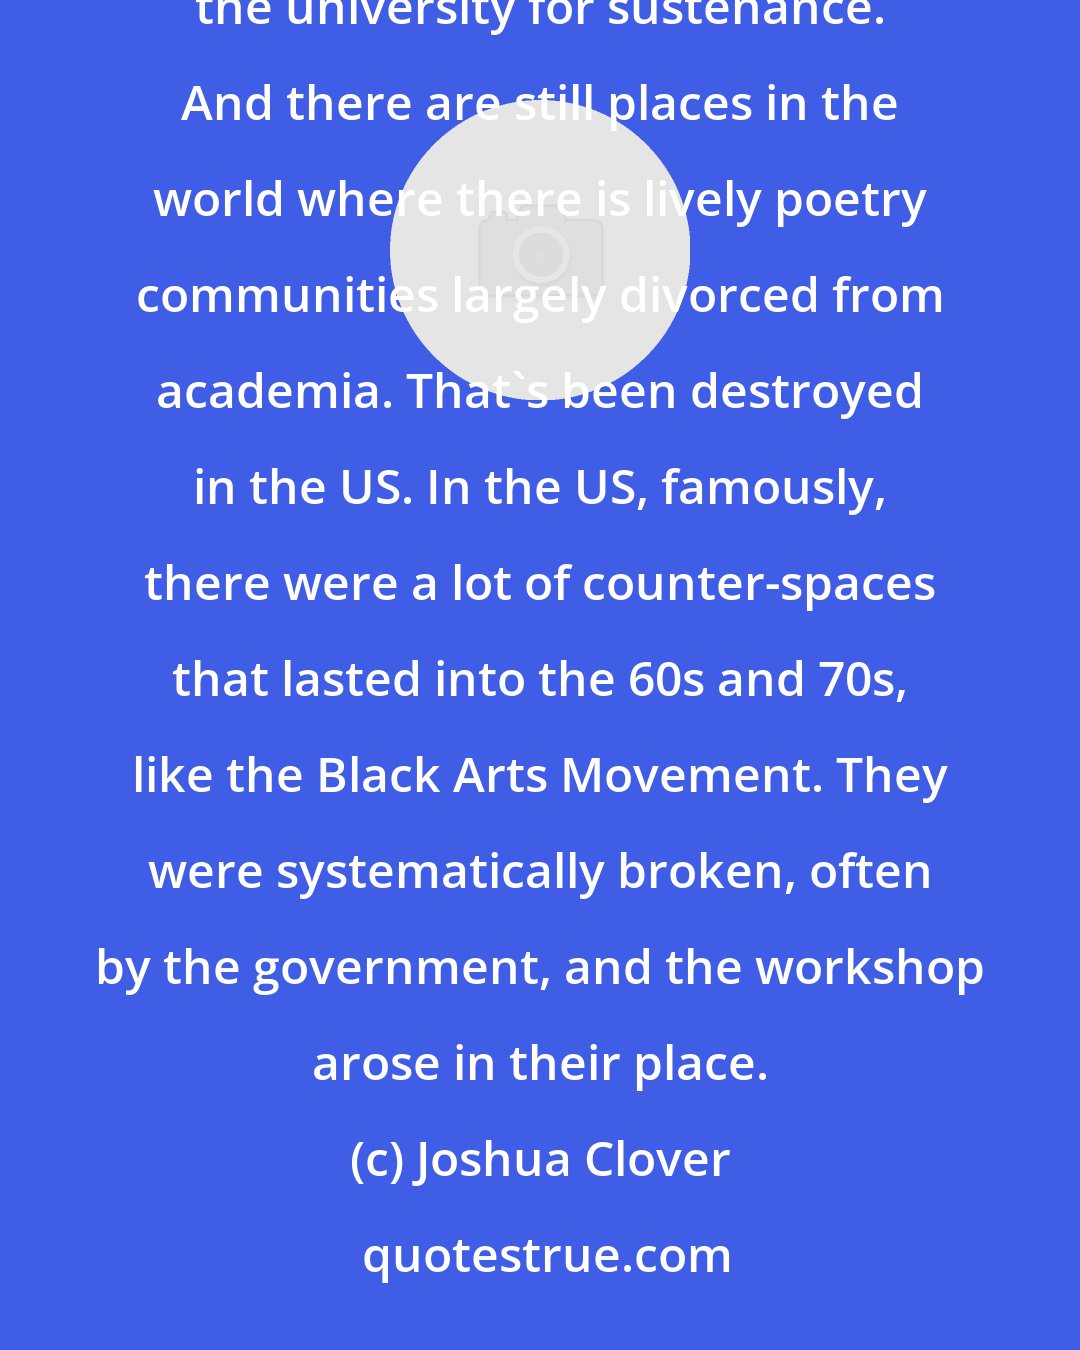 Joshua Clover: There are places in the world where it's easier than in the US to be a person who produces theory and not require the university for sustenance. And there are still places in the world where there is lively poetry communities largely divorced from academia. That's been destroyed in the US. In the US, famously, there were a lot of counter-spaces that lasted into the 60s and 70s, like the Black Arts Movement. They were systematically broken, often by the government, and the workshop arose in their place.